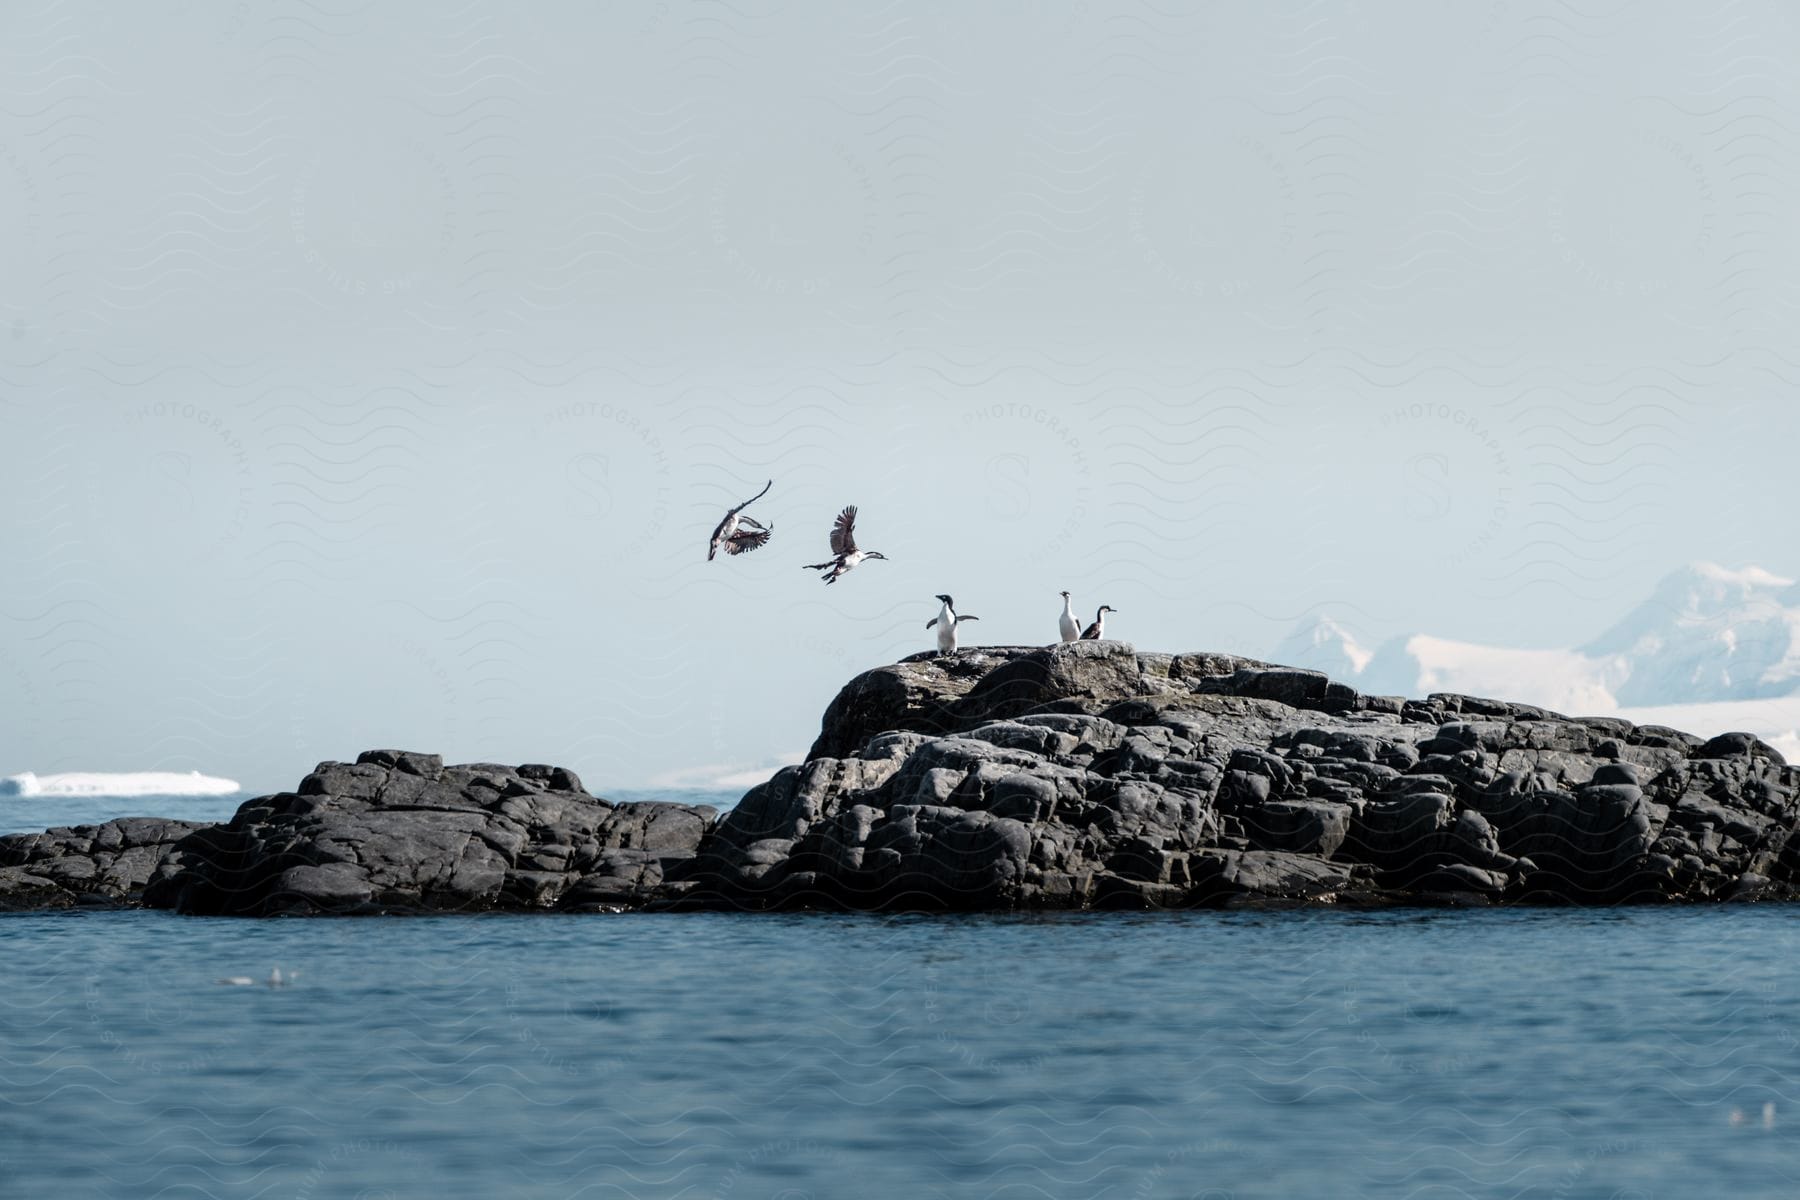 Birds posing on a rock over a body of water, with a clear sky and calm waters.